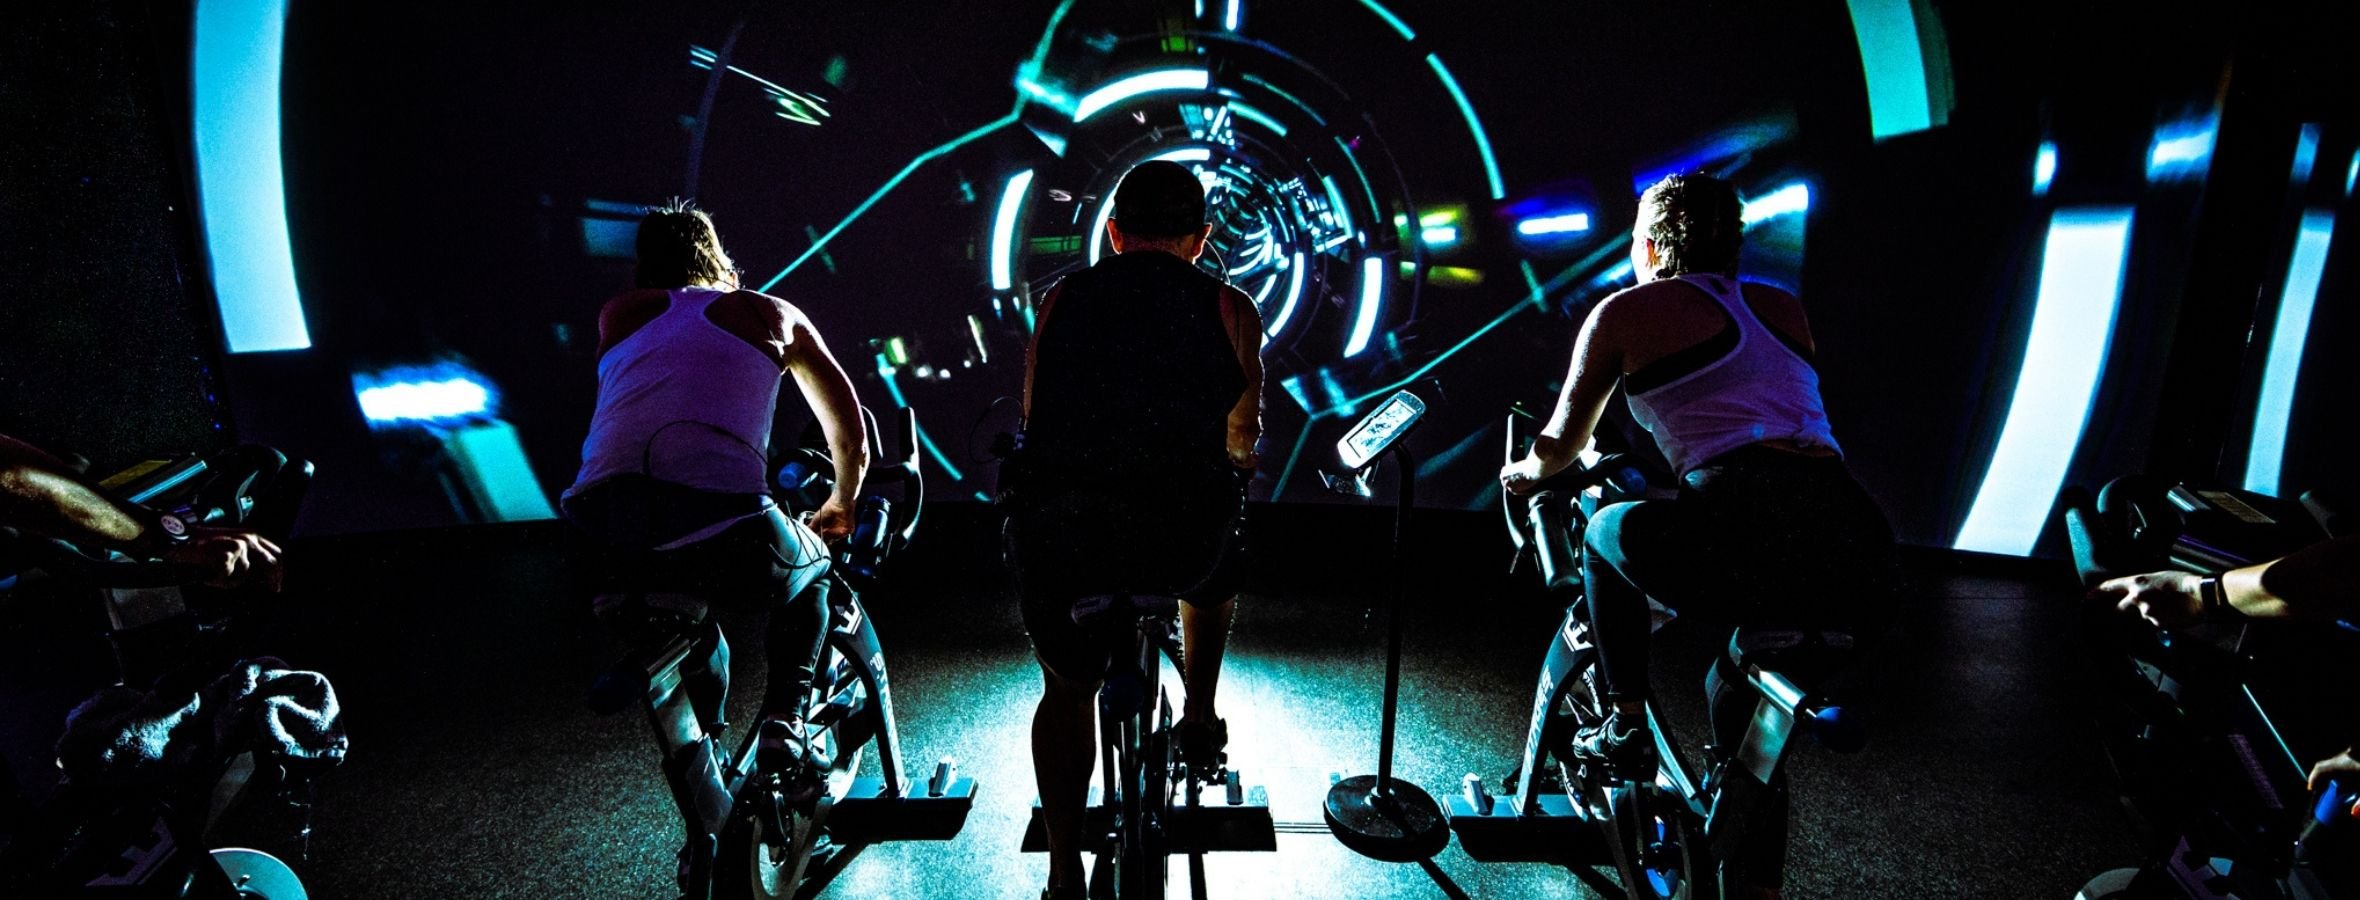 A virtual cycling studio with three cyclists and a dark futuristic scene on a video wall